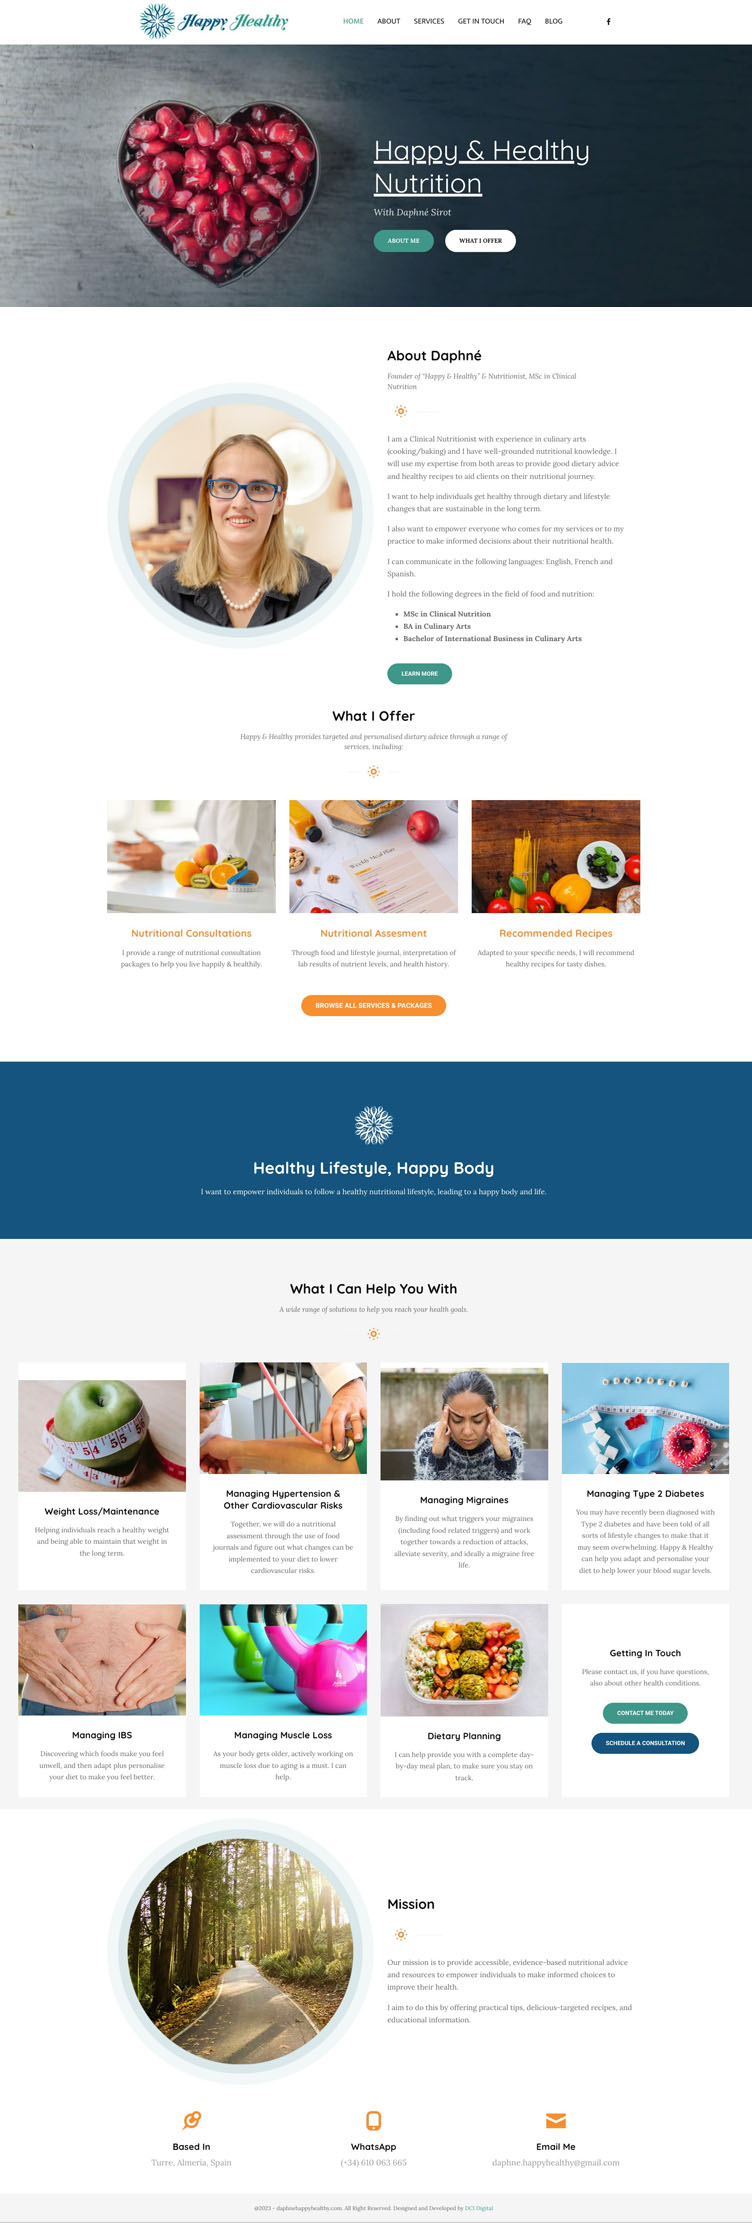 A full mock-up of a web design completed for Happy & Healthy